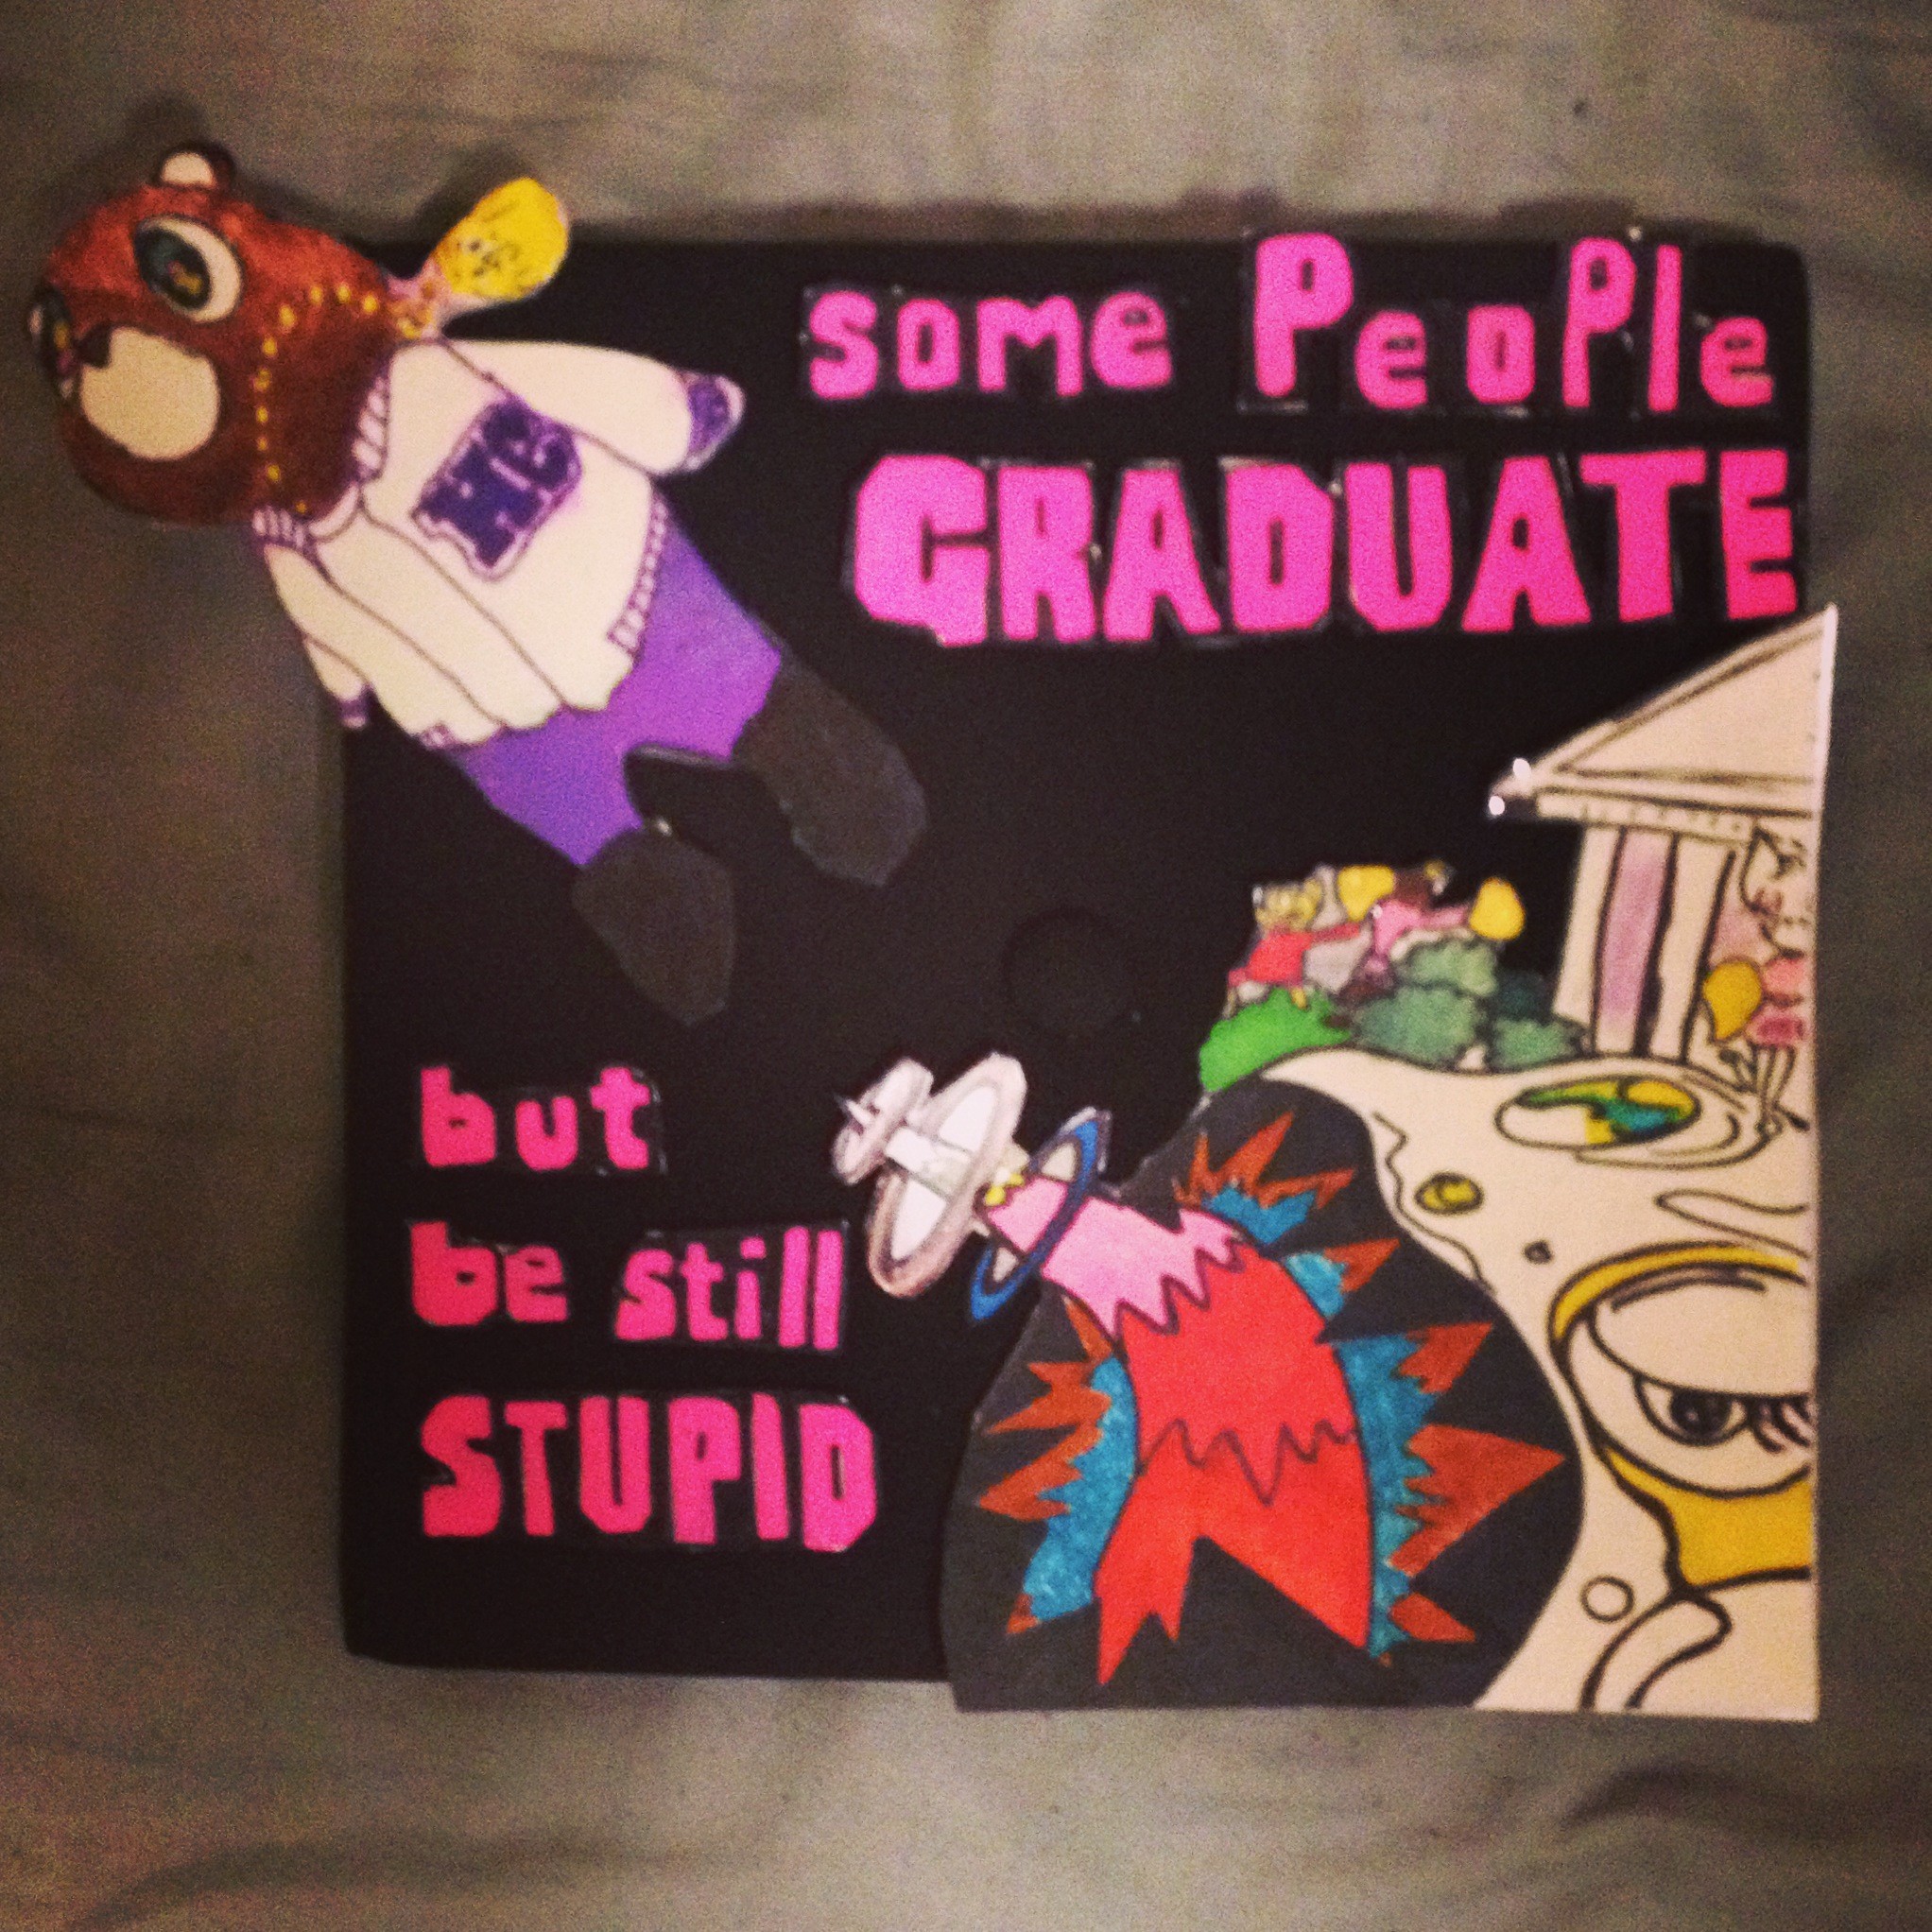 2044x2044 Graduation Cap inspired by Kanye West's Good Morning.